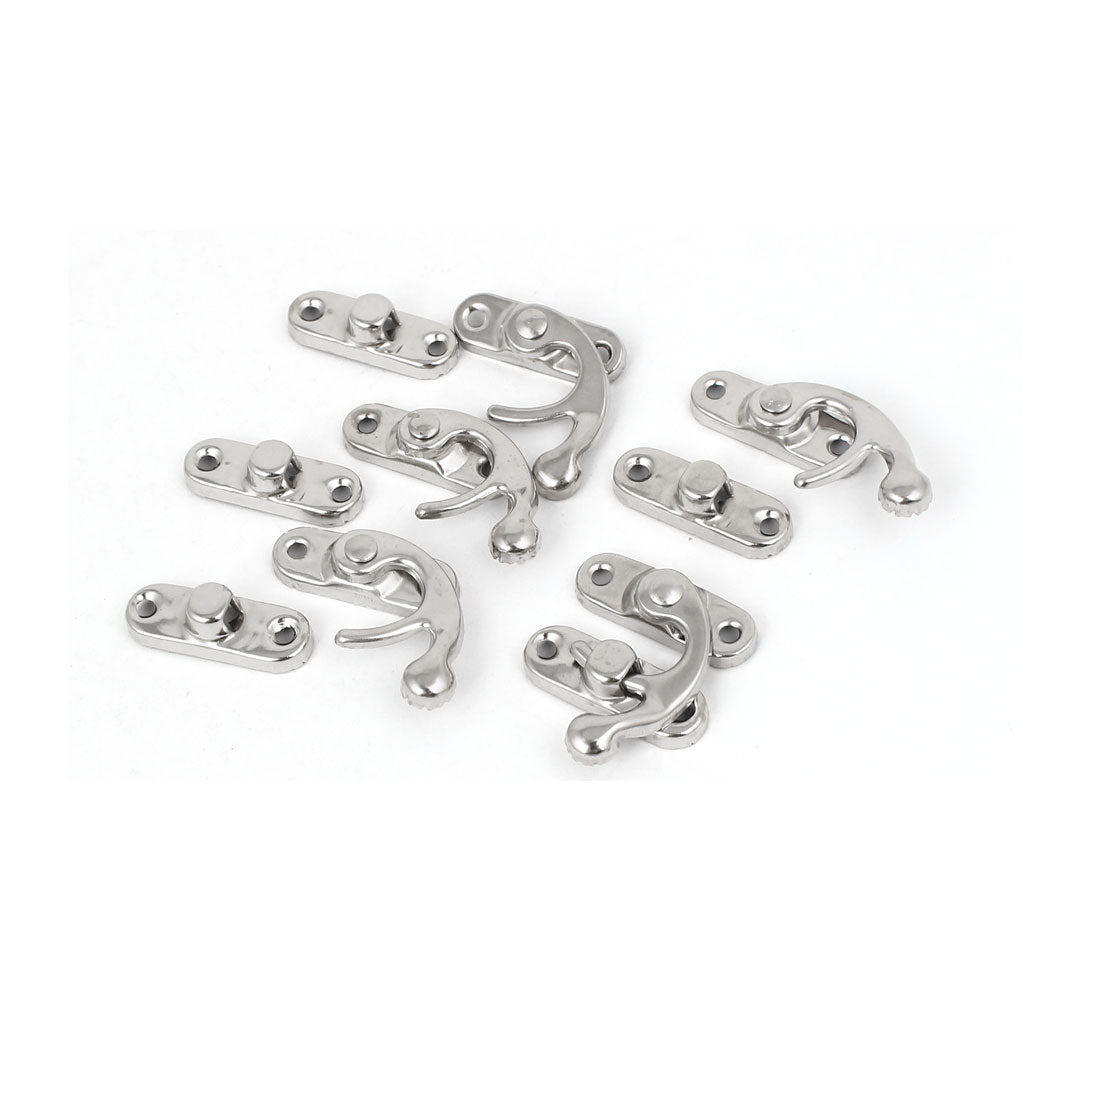 uxcell Uxcell Jewelry Box Case Right Latch Hook Hasp Catch Lock Silver Tone 5pcs